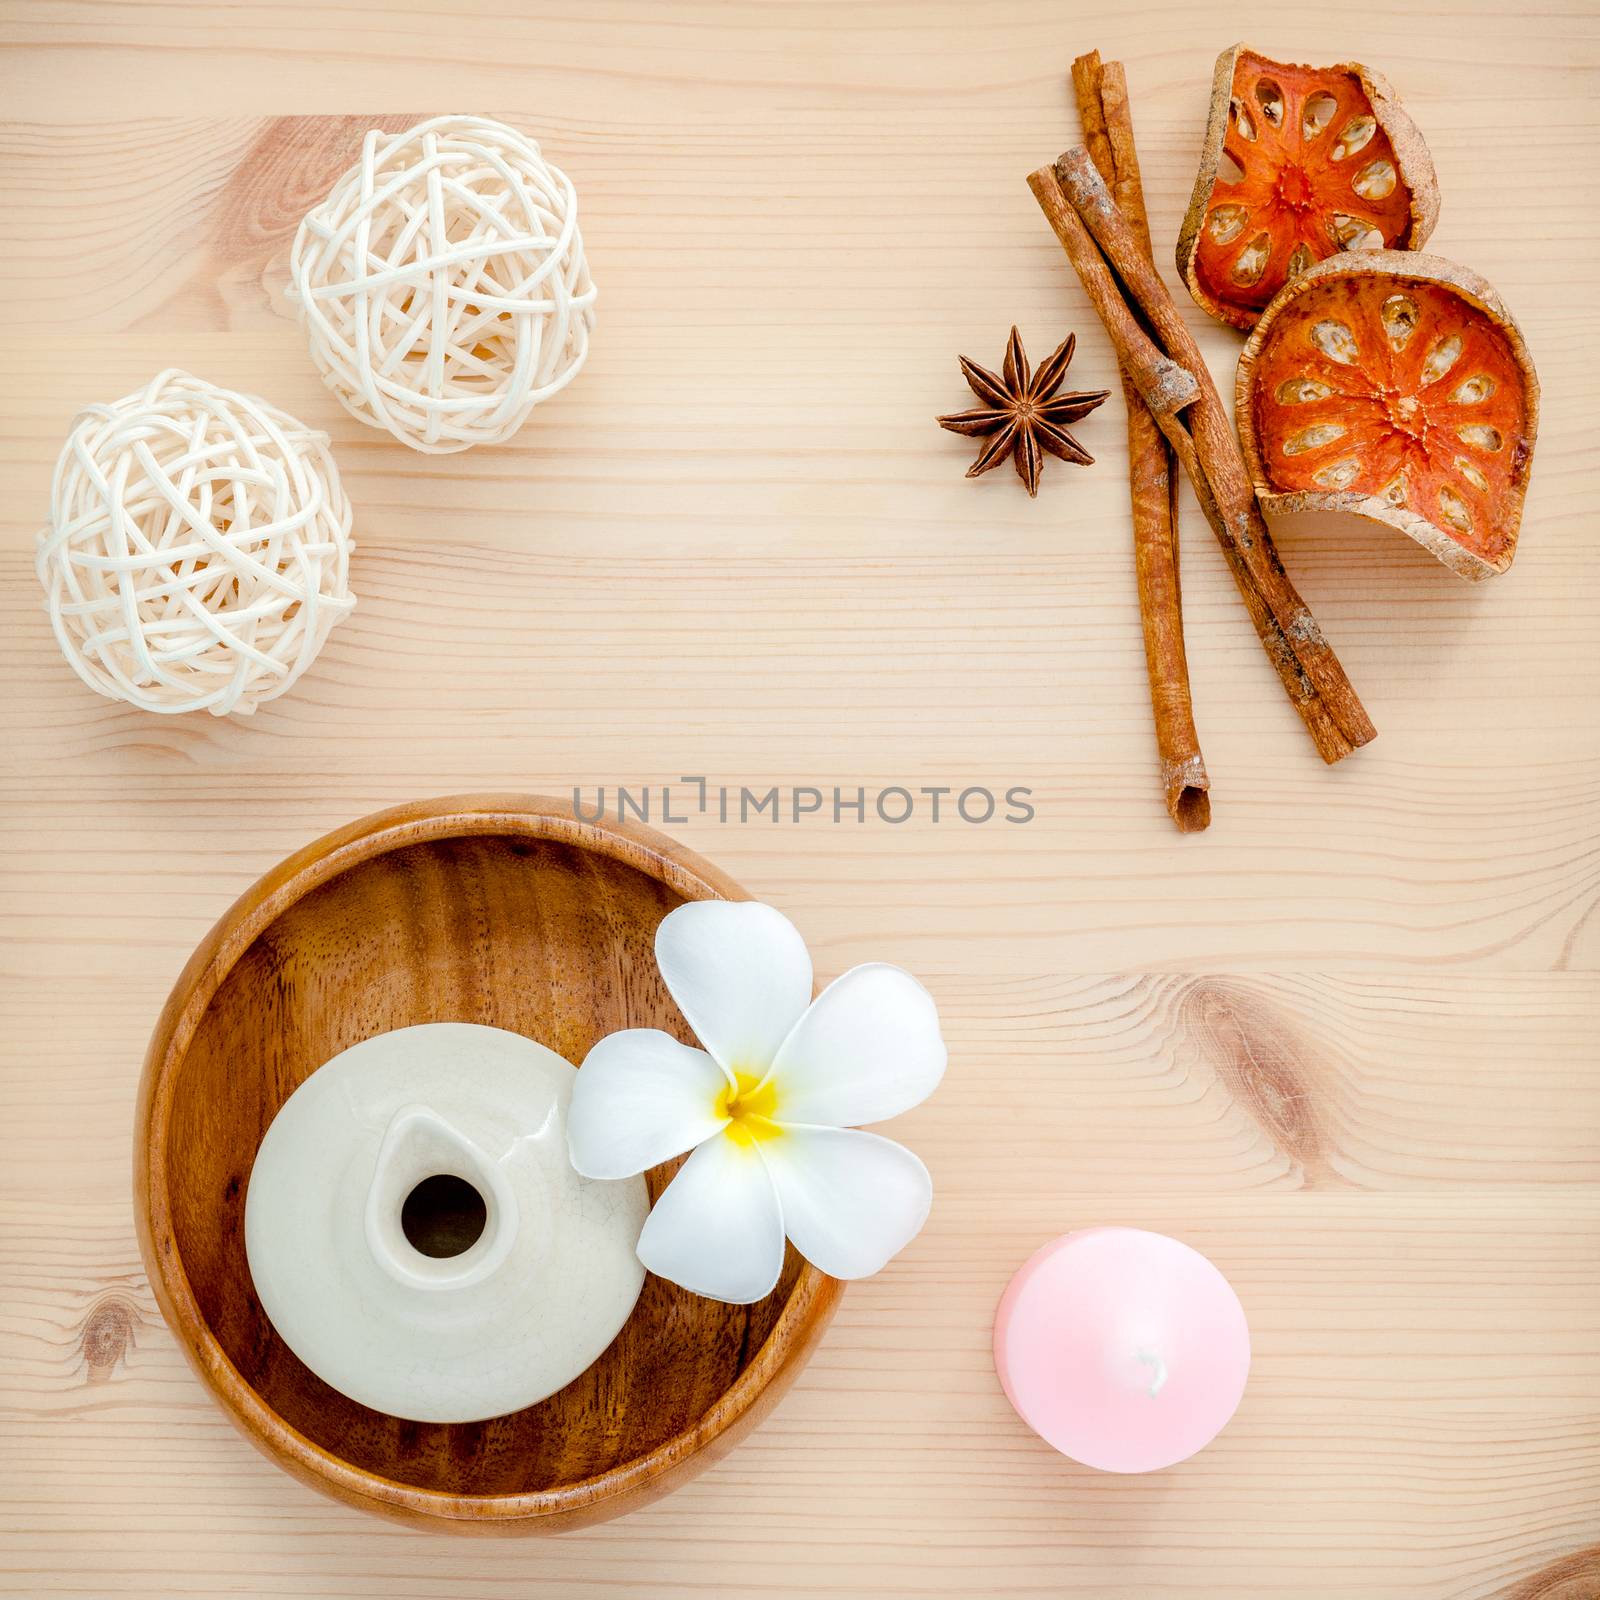 Frangipani tropical flowers with herba spa products . Plumeria f by kerdkanno